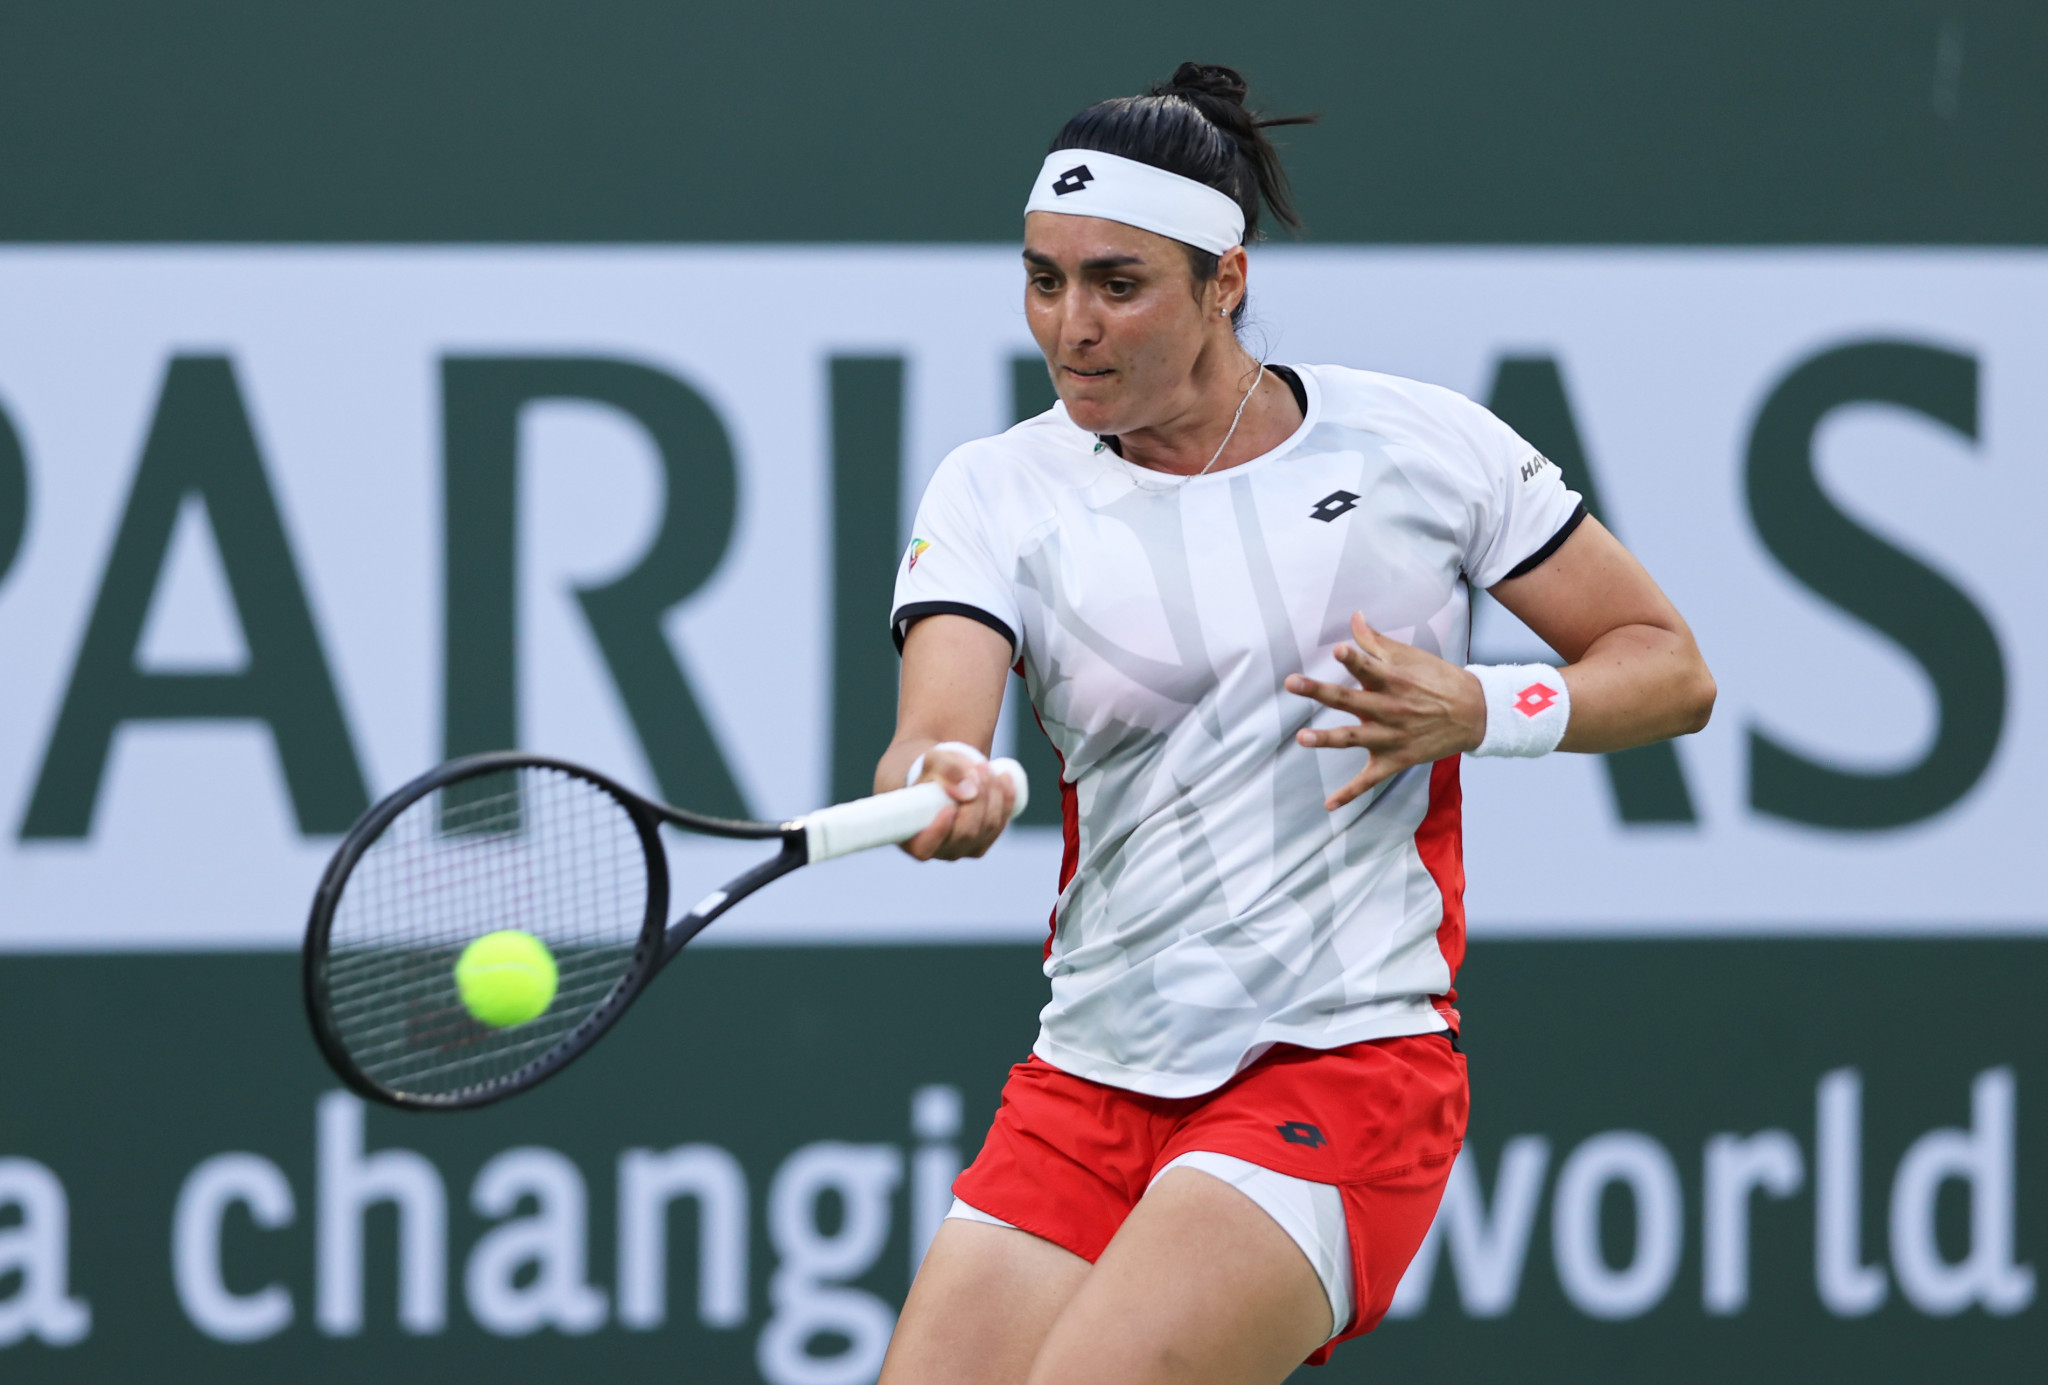 Jabeur sets up women's singles semi-final with Badosa at Indian Wells Masters